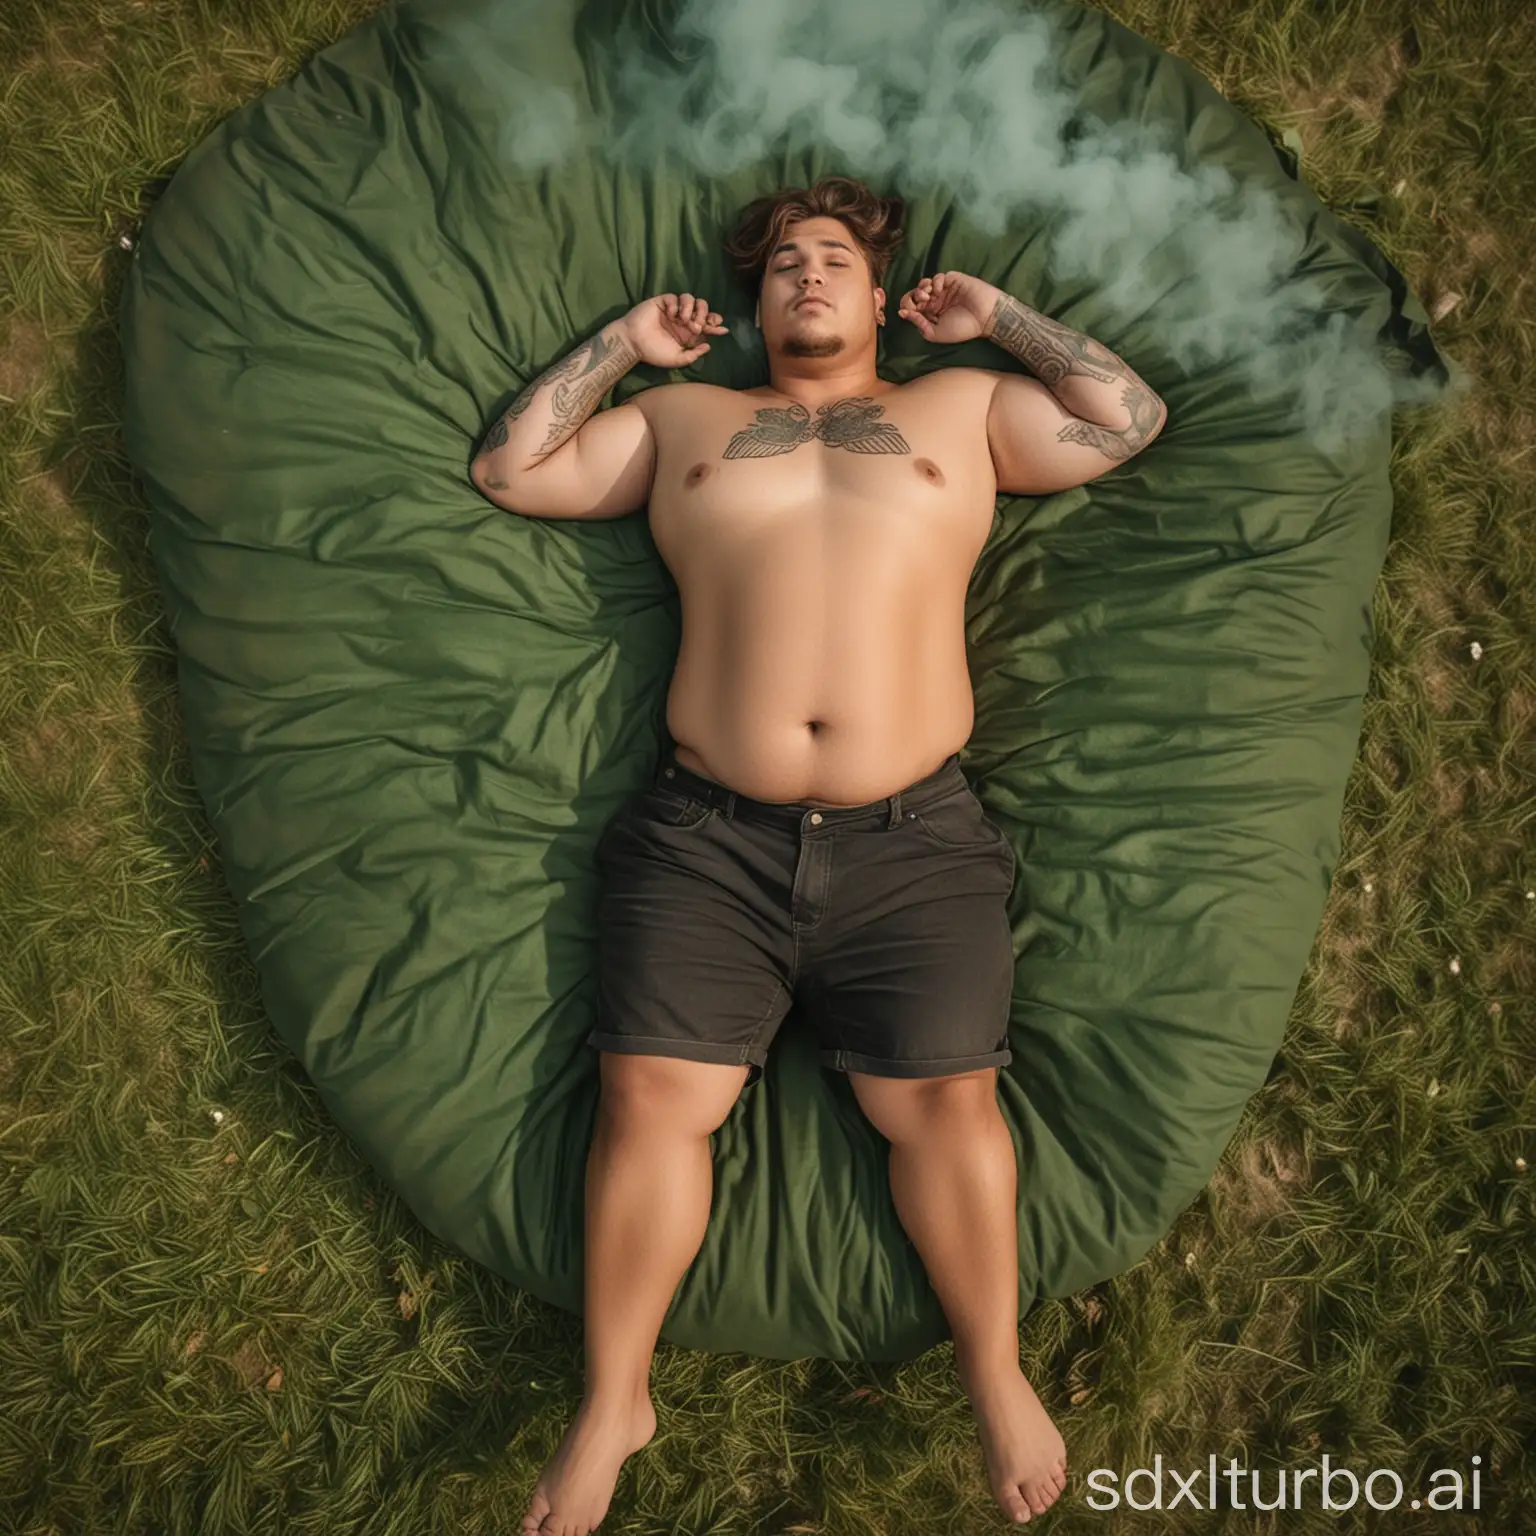 a tall handsome chubby tanned and young man, brown mullet hair, big belly, with mini tattoos, spreading green smoke behind, lying on the grass floor, sensual posing, on an obscure tent environment, concept art style